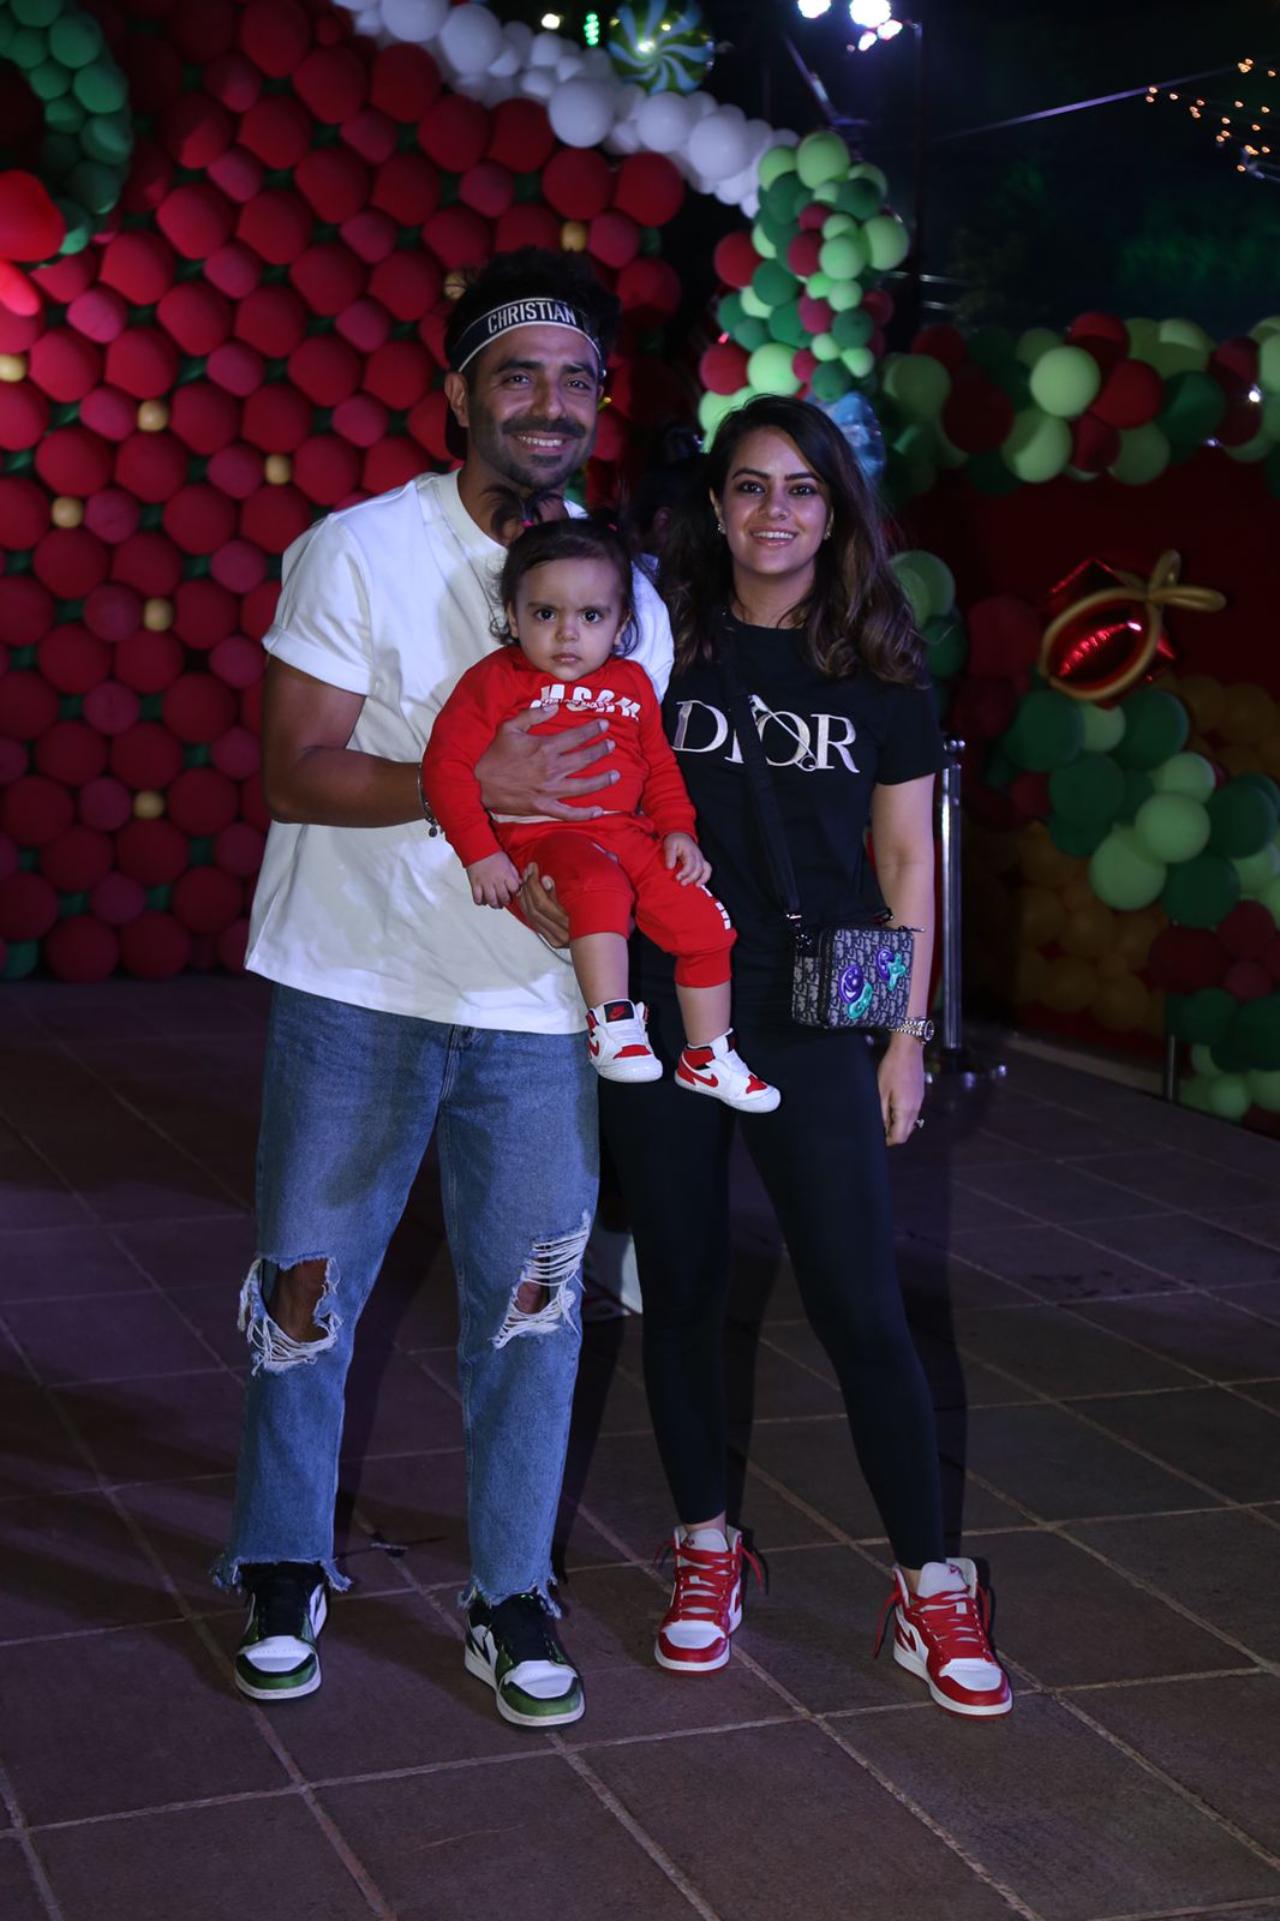 Aparshakti Khurana arrived with his wife Aakriti Ahuja and daughter Arzoie. He opted for a white t-shirt and shredded blue jeans